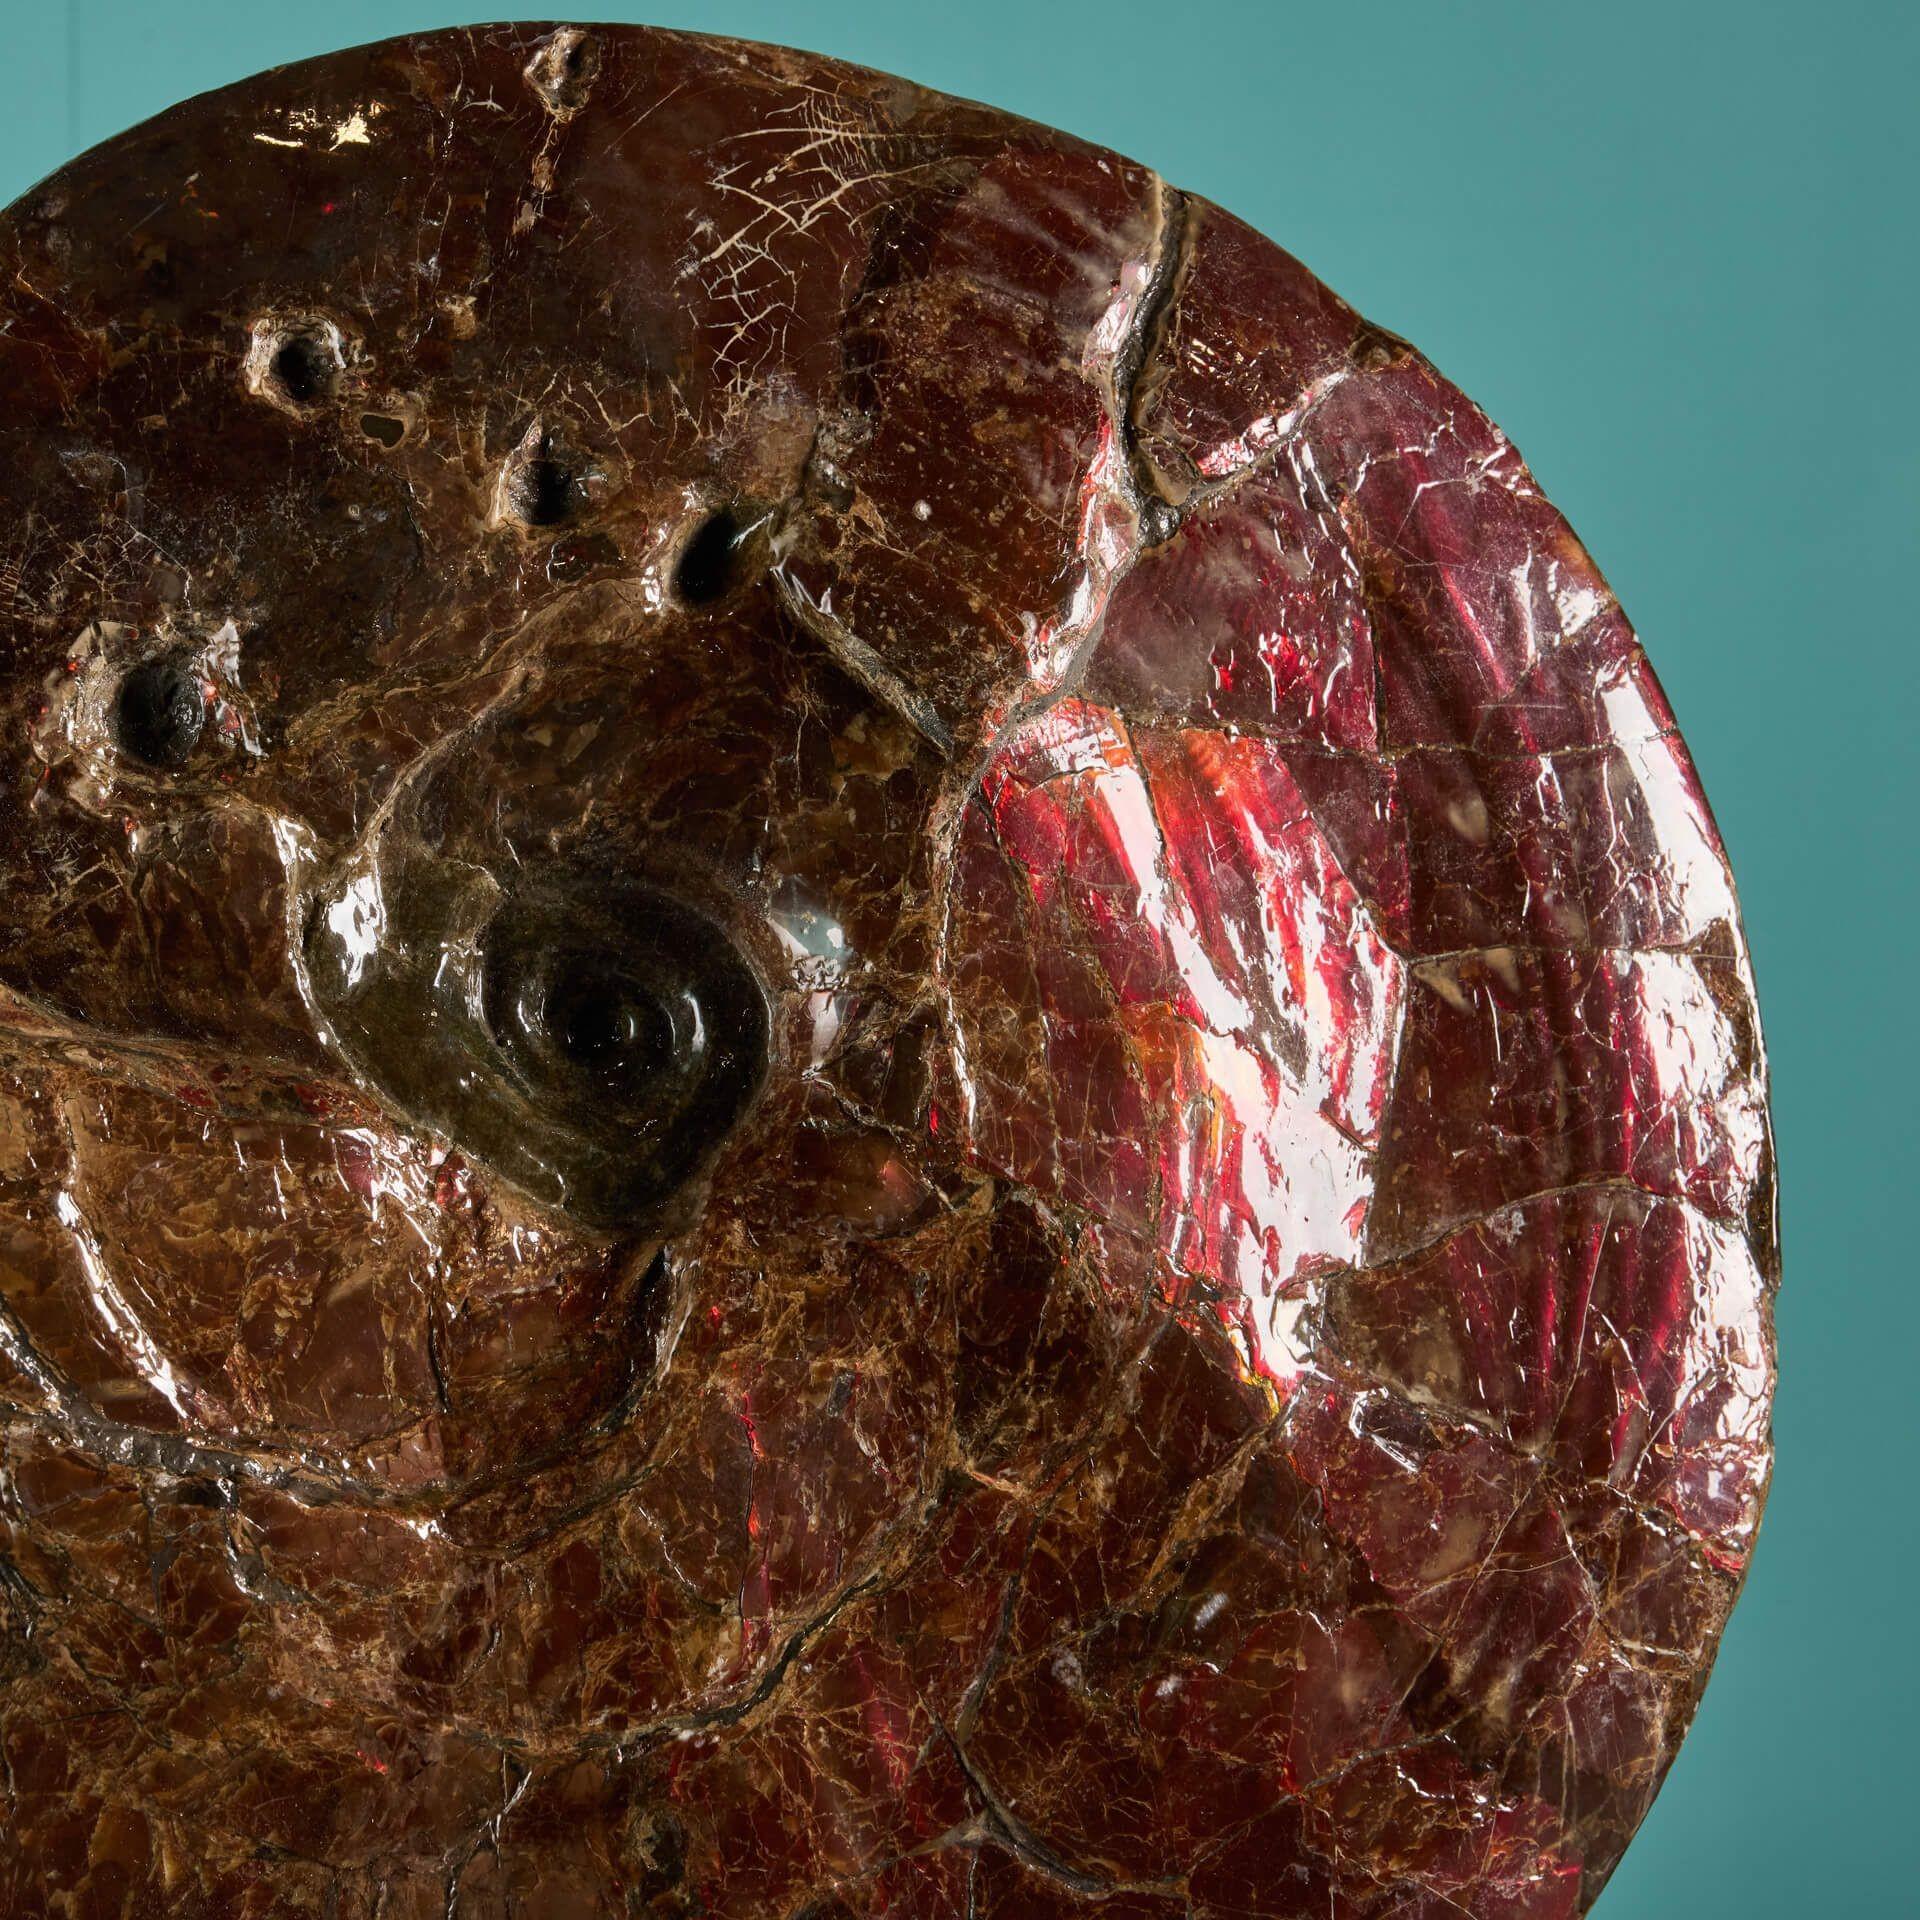 A large red iridescent ammonite fossil dating from the late cretaceous period (100.5 – 66 million years ago). This huge plancenticeras ammonite is approximately 16 inches tall and has an iridescent lustre that showcases a vibrant red hue. Once a